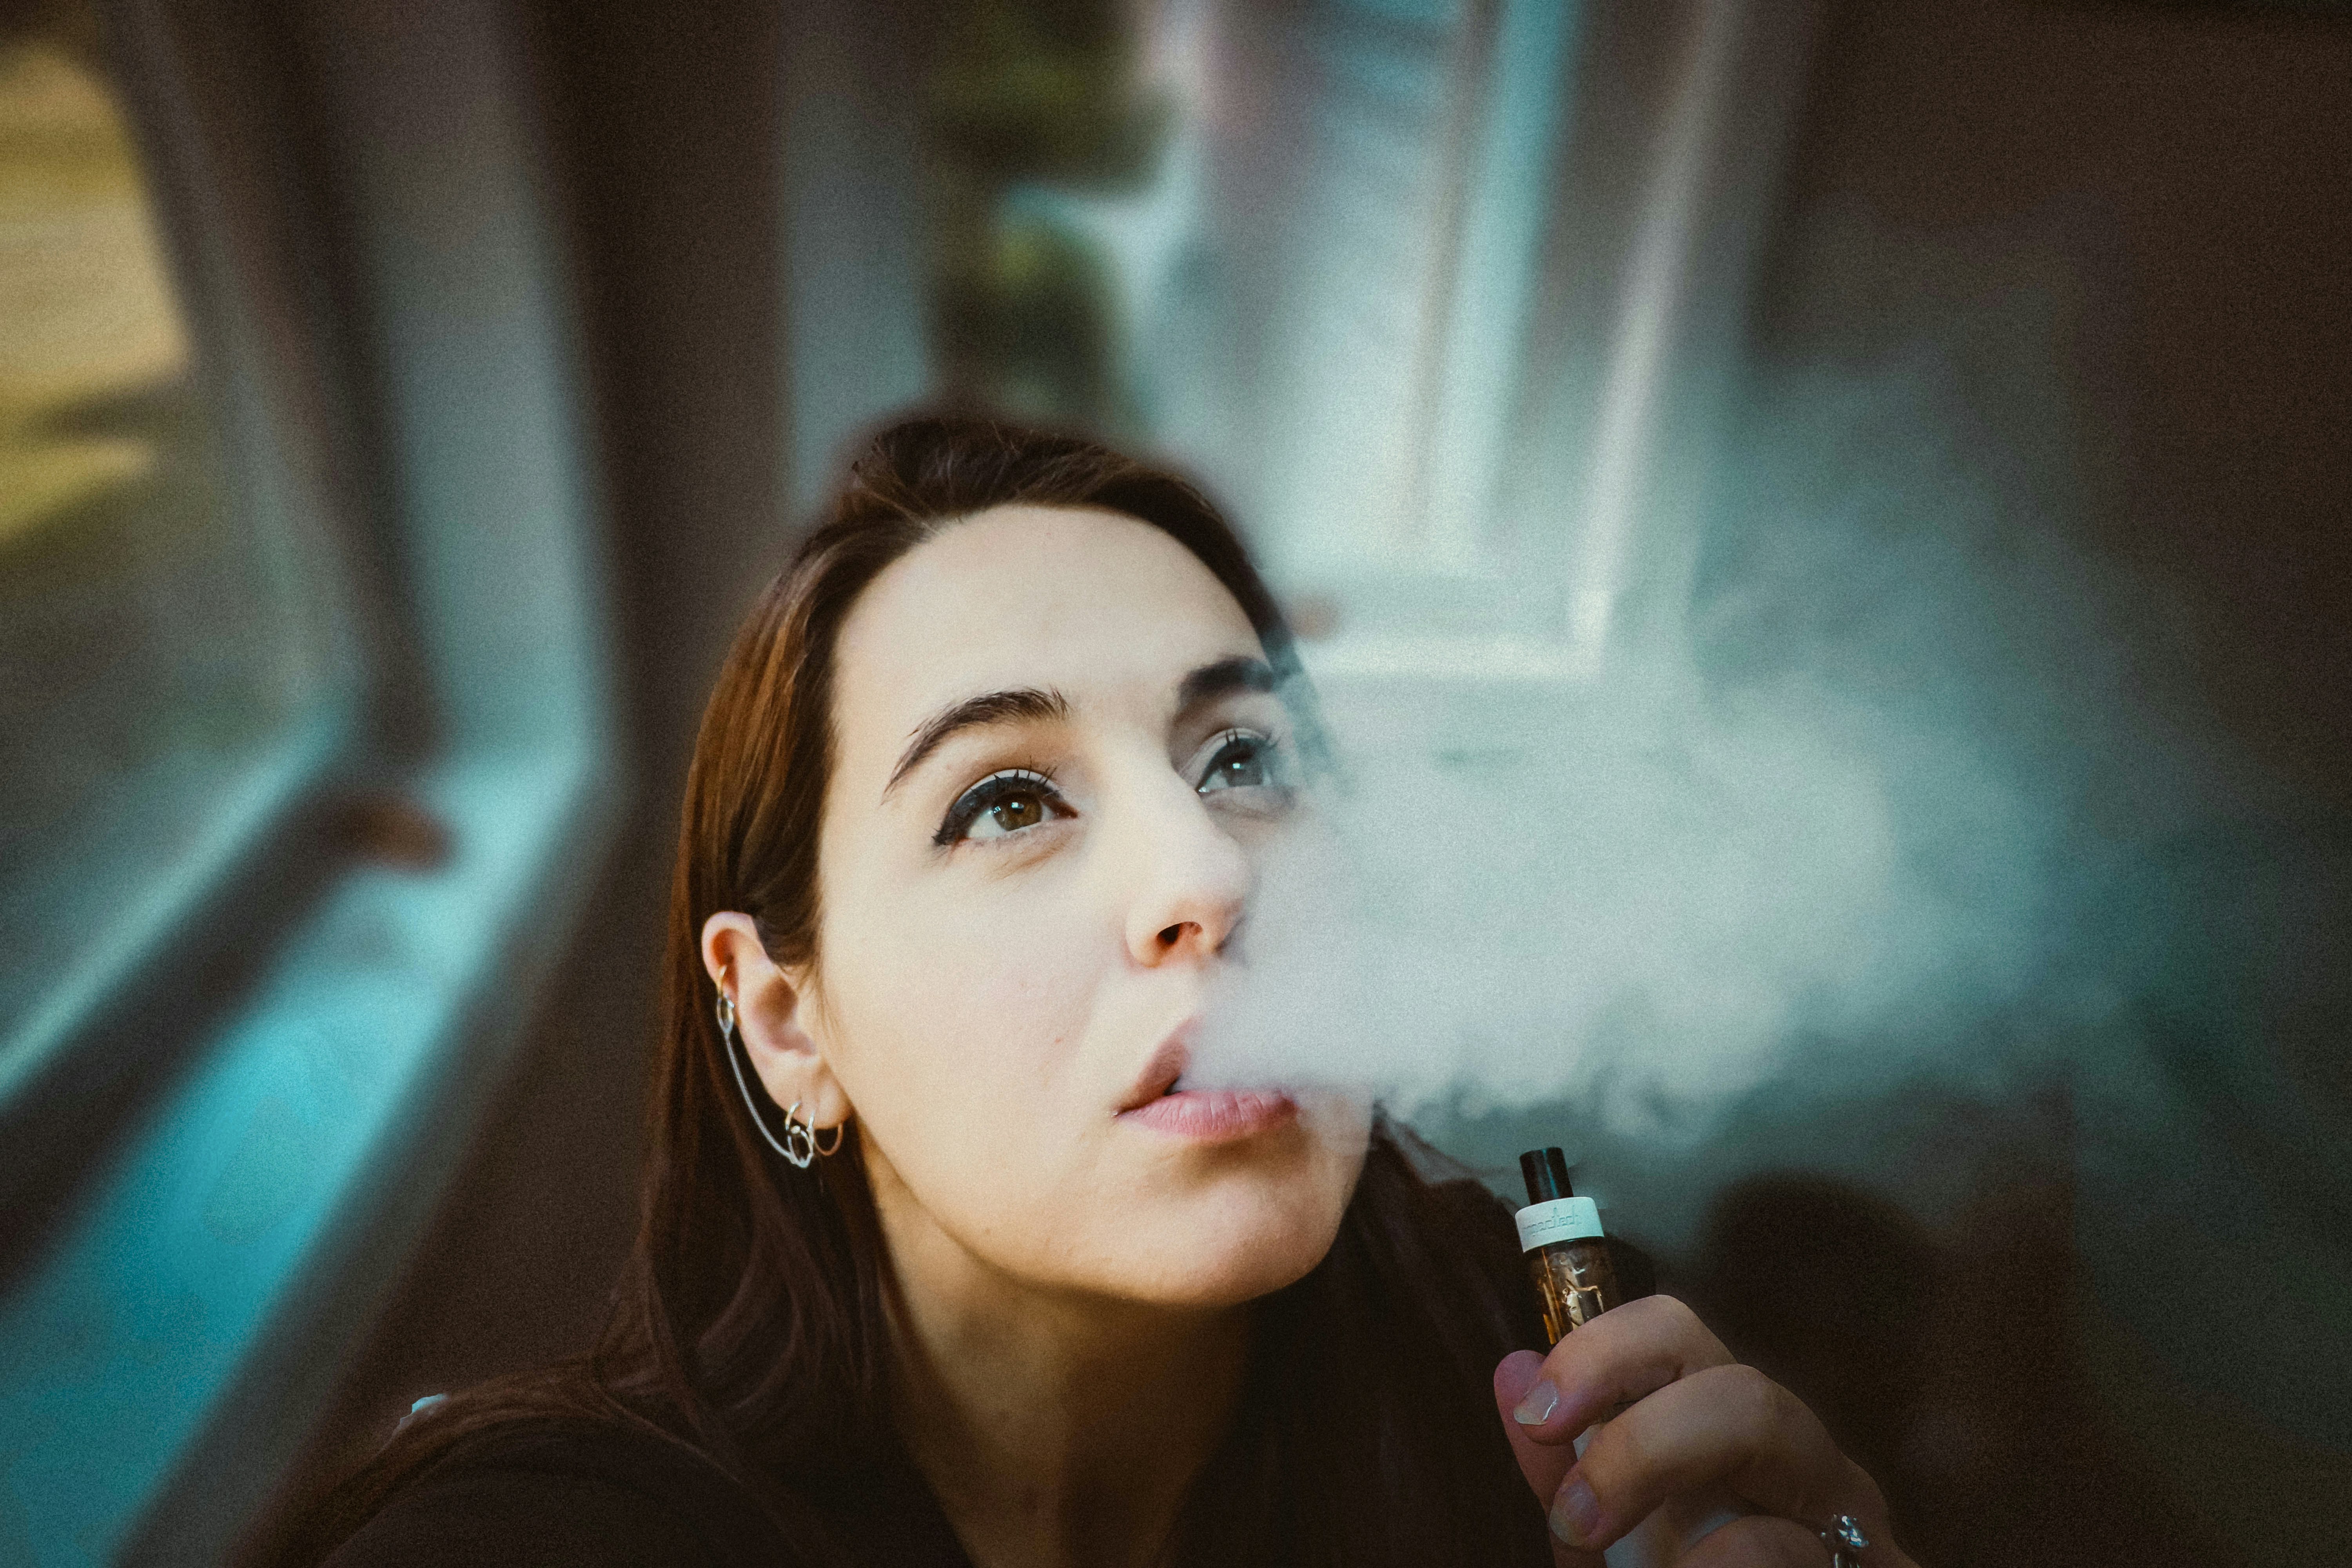 Vaporizer Safety: Tips For Proper Usage And Precautions